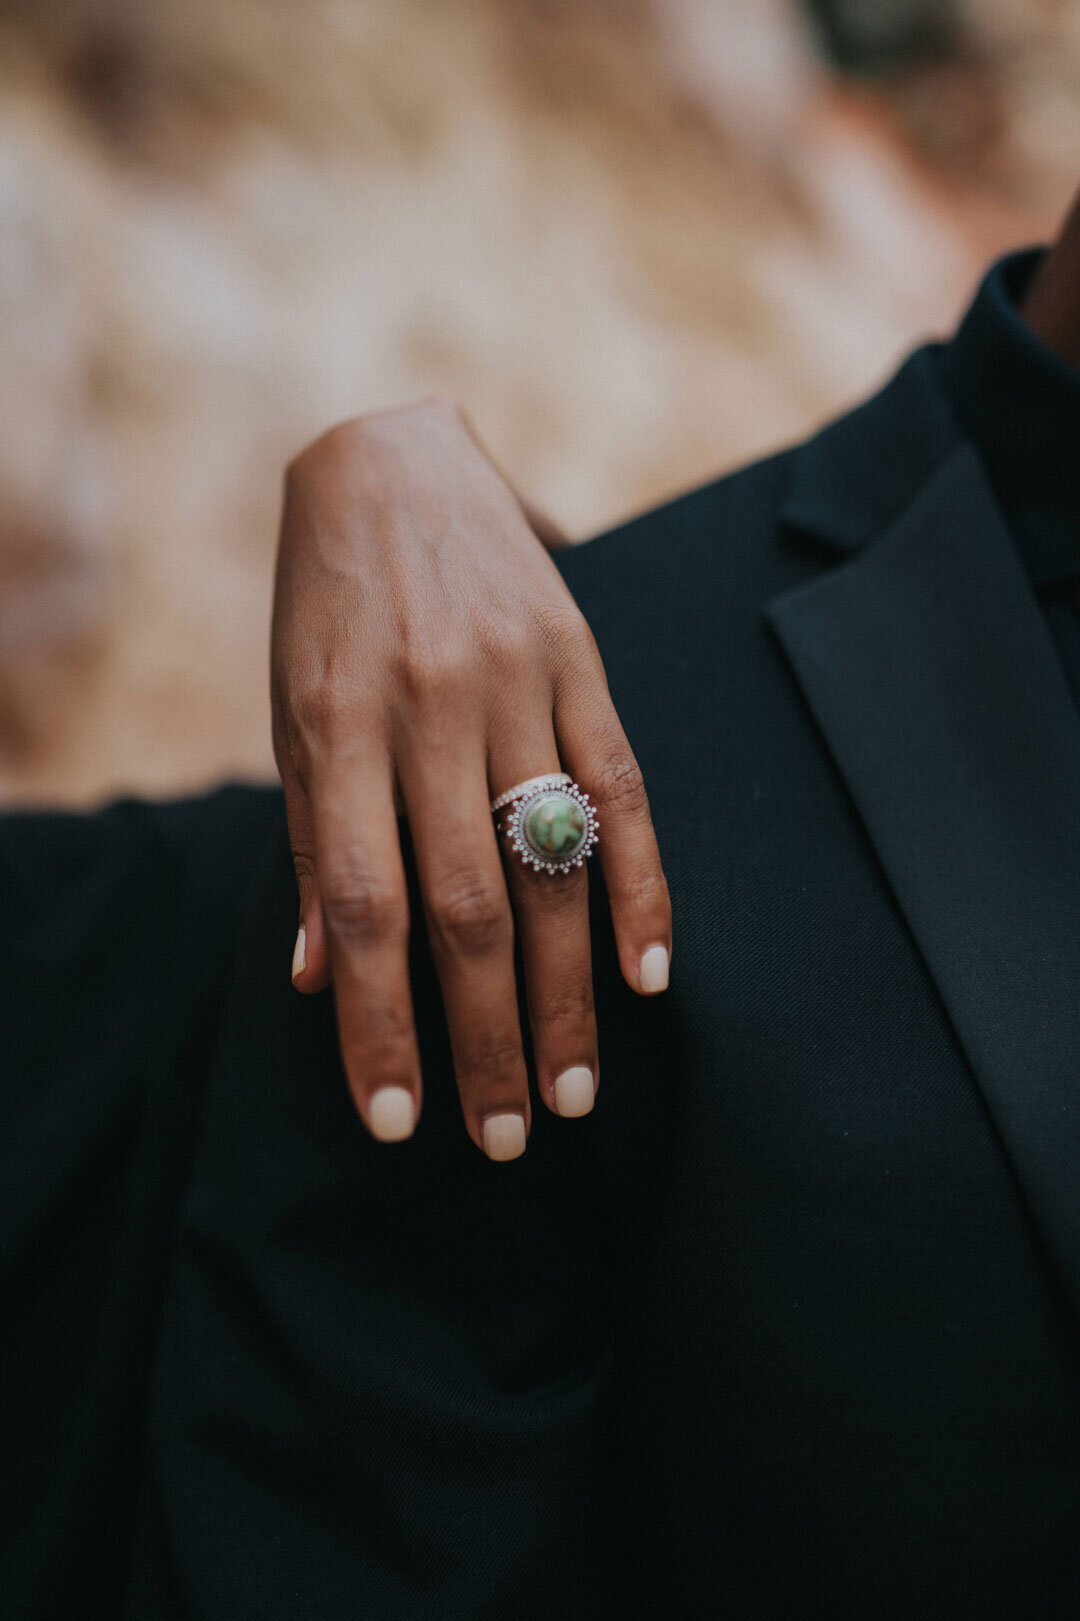 Black woman's hand with large ring